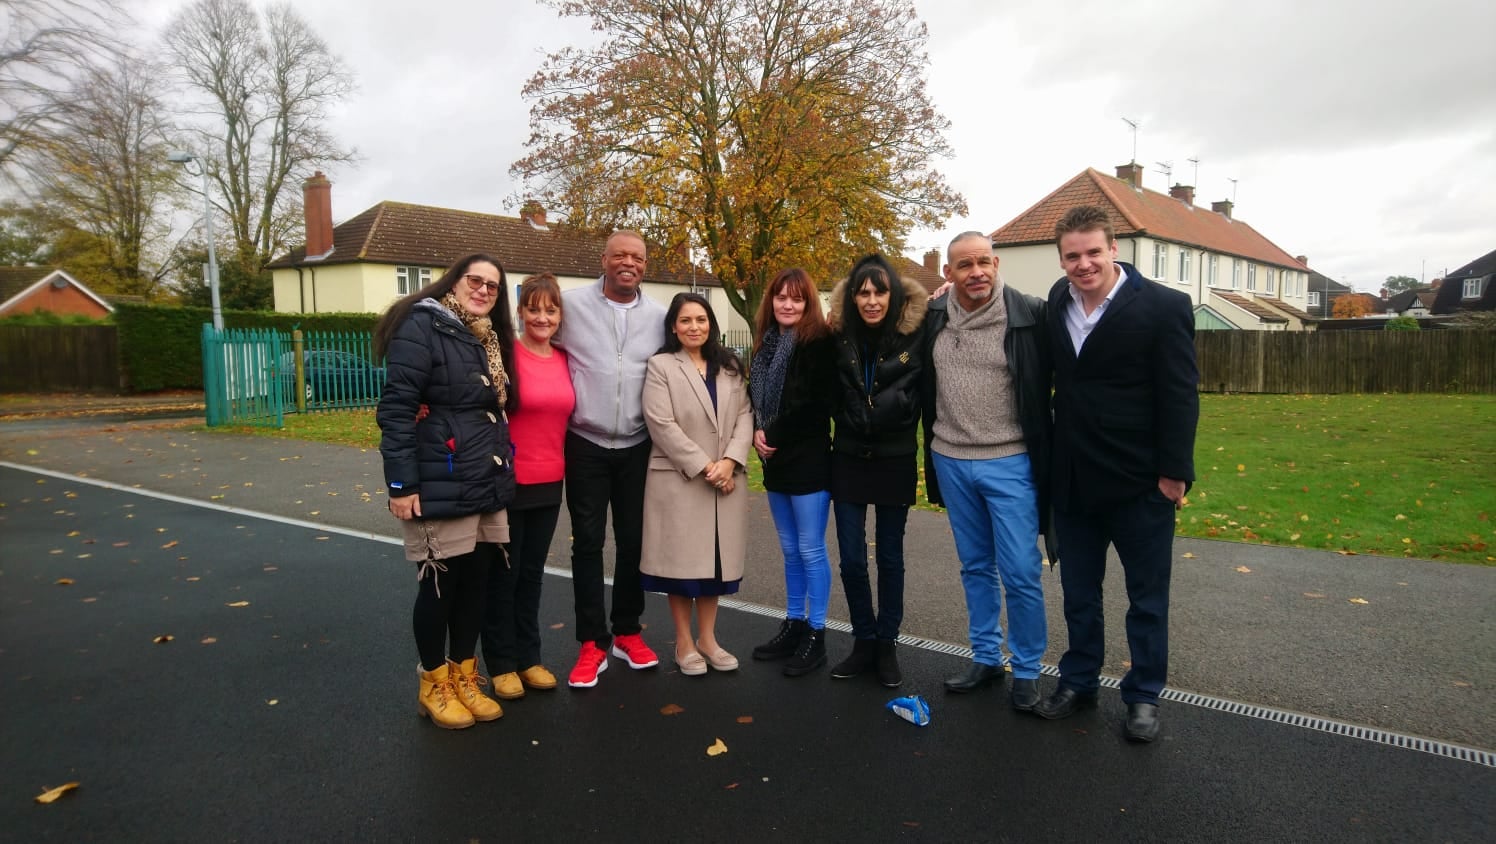 I was back at the Nansen Road Baptist Church this morning to welcome the Home Secretary Priti Patel to meet the inspirational volunteers behind the reflections youth club.